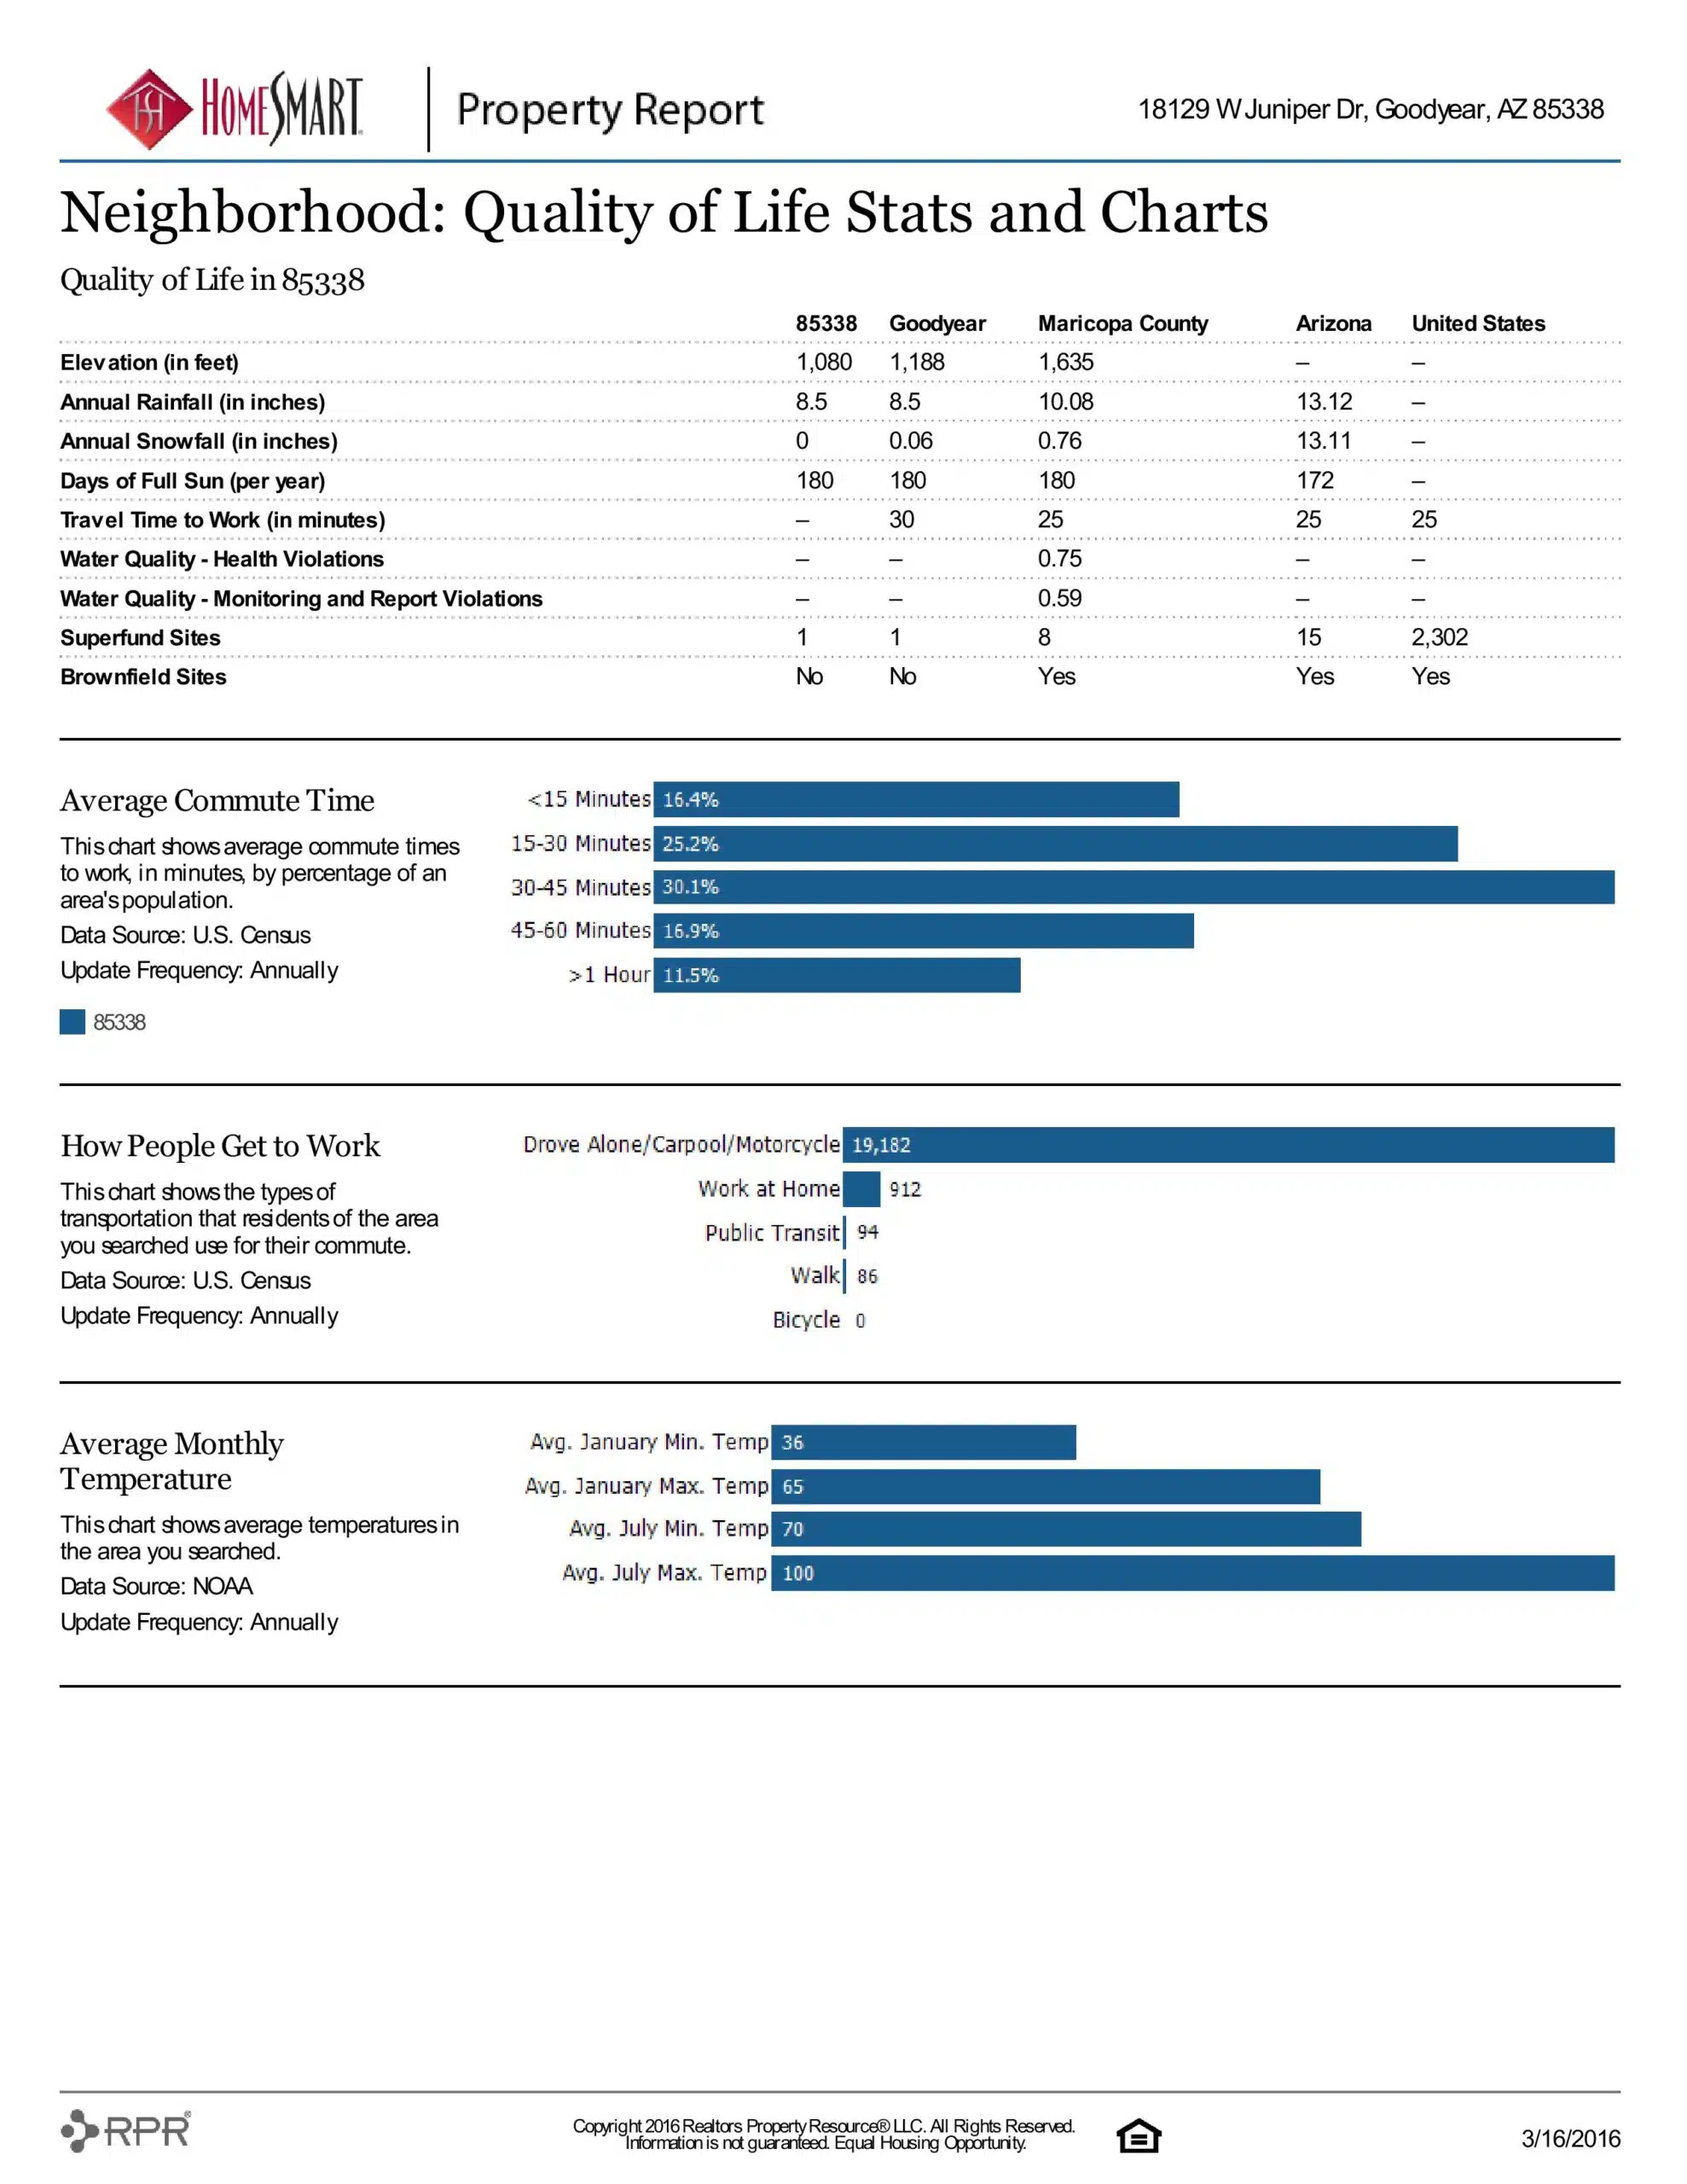 18129 W JUNIPER DR PROPERTY REPORT-page-025